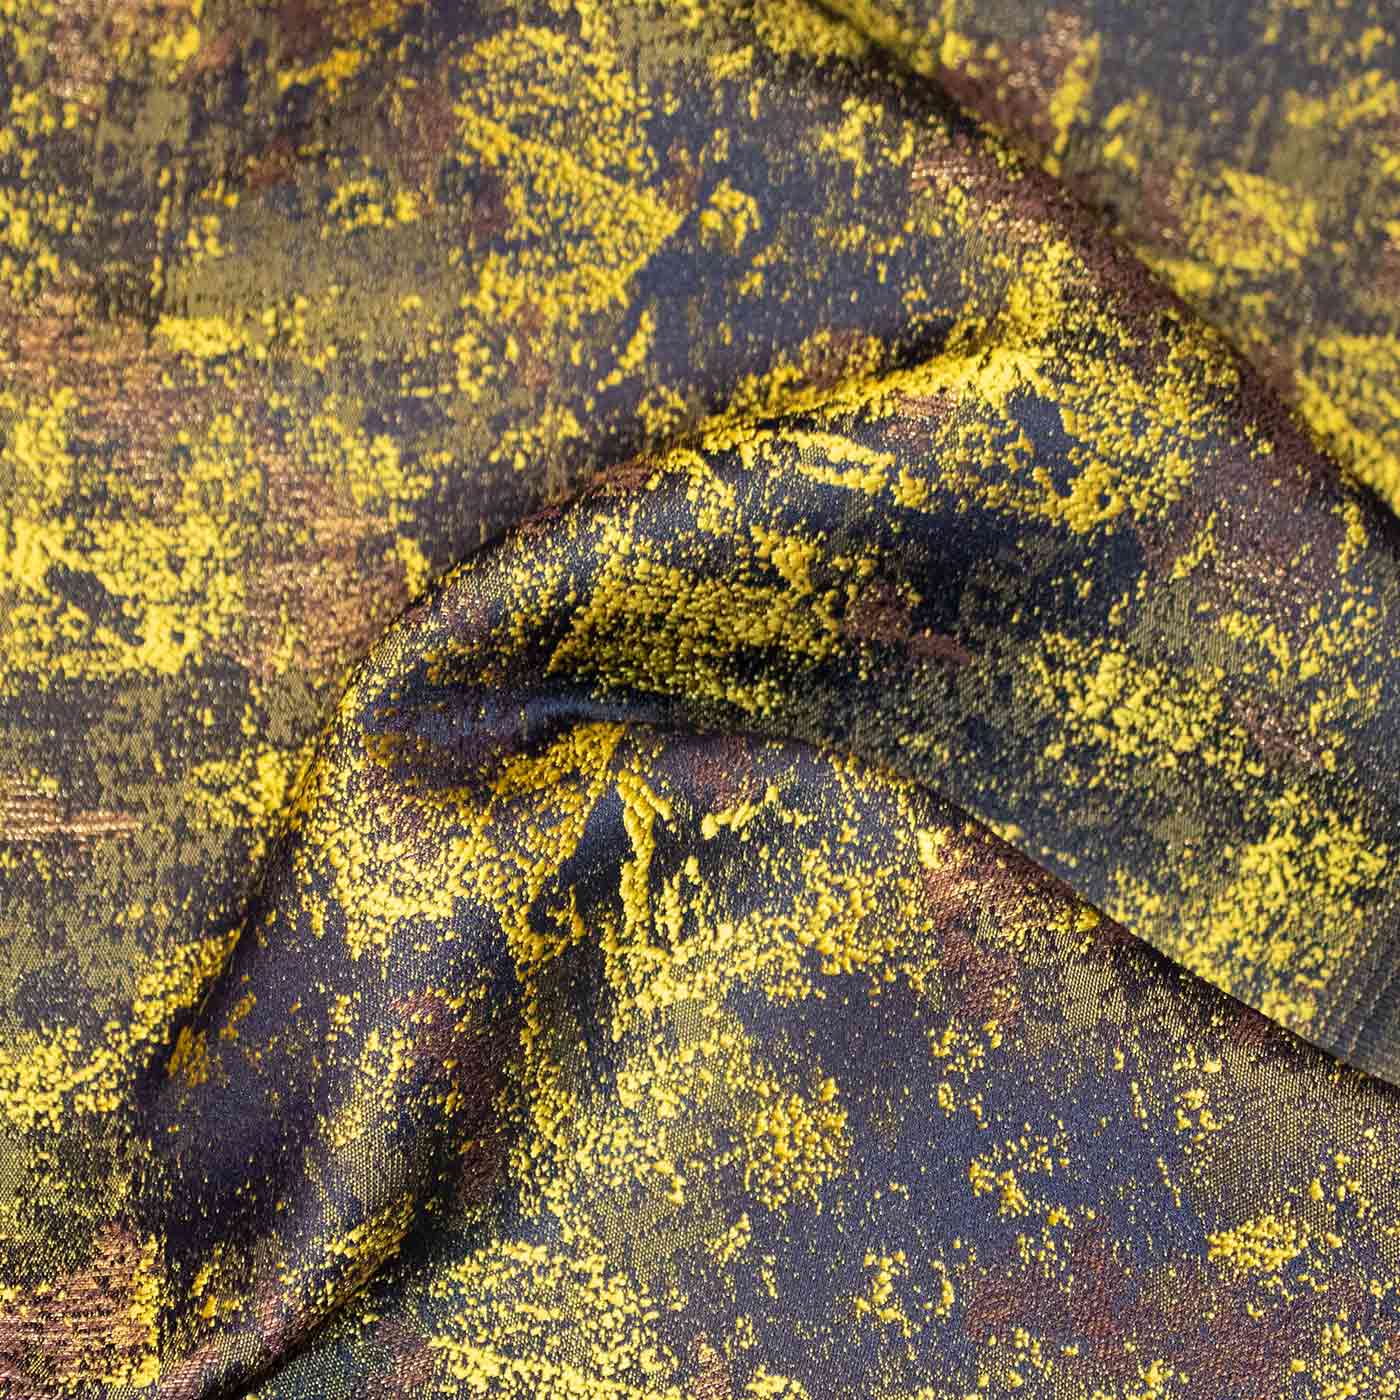 yellow-and-blue-french-brocade-fabric